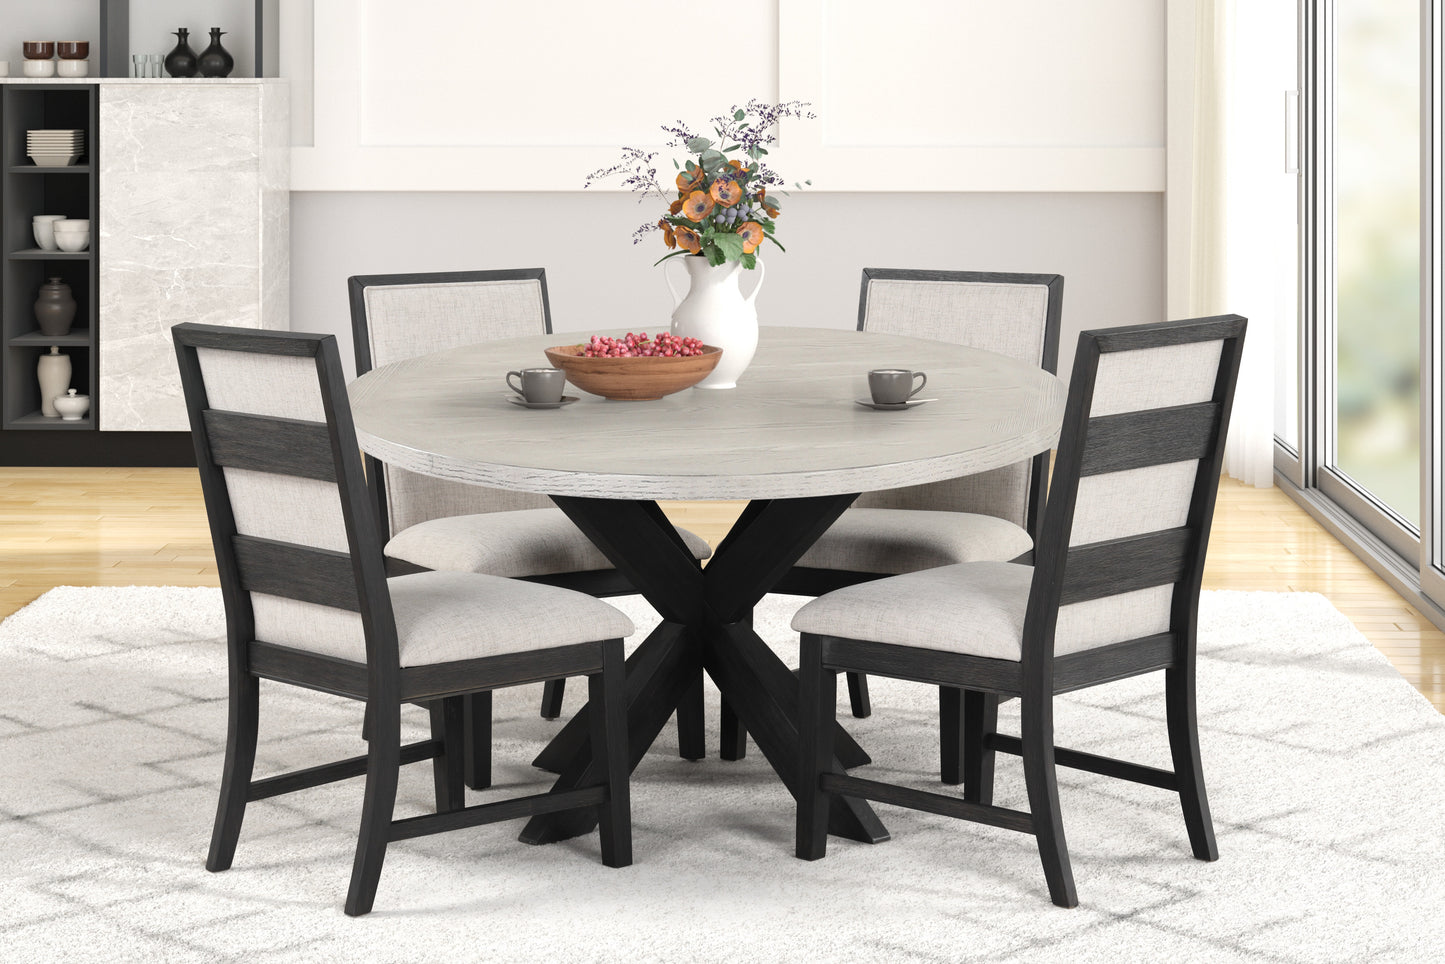 Gates 5-Piece Round Dining Set, Criss-Cross Dining Table with 4 Stylish Chairs, Light Gray